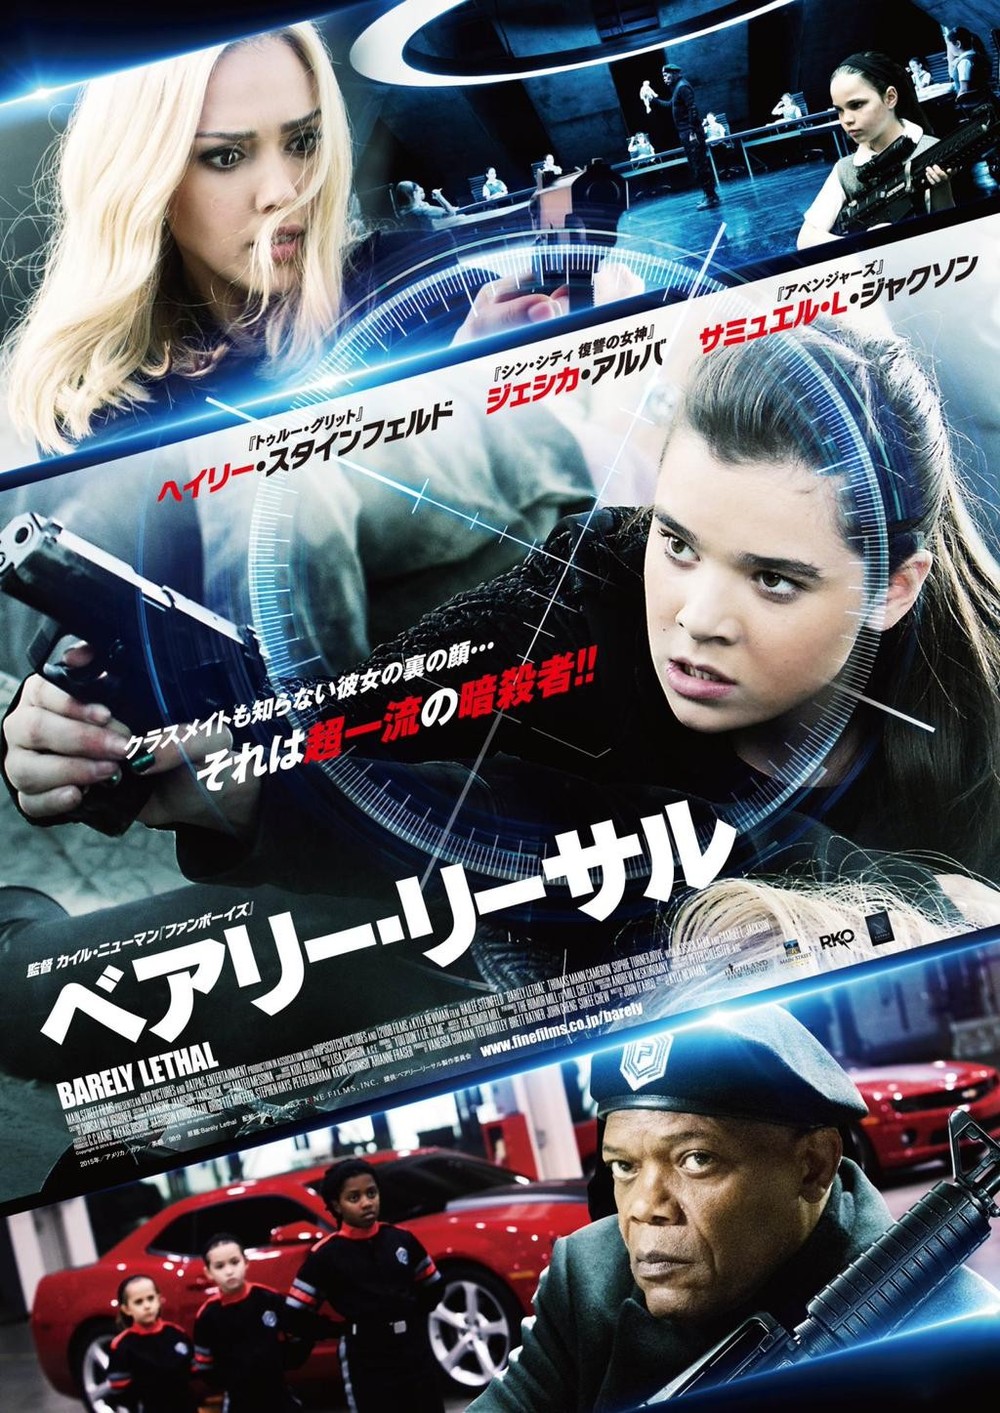 2015 Barely Lethal